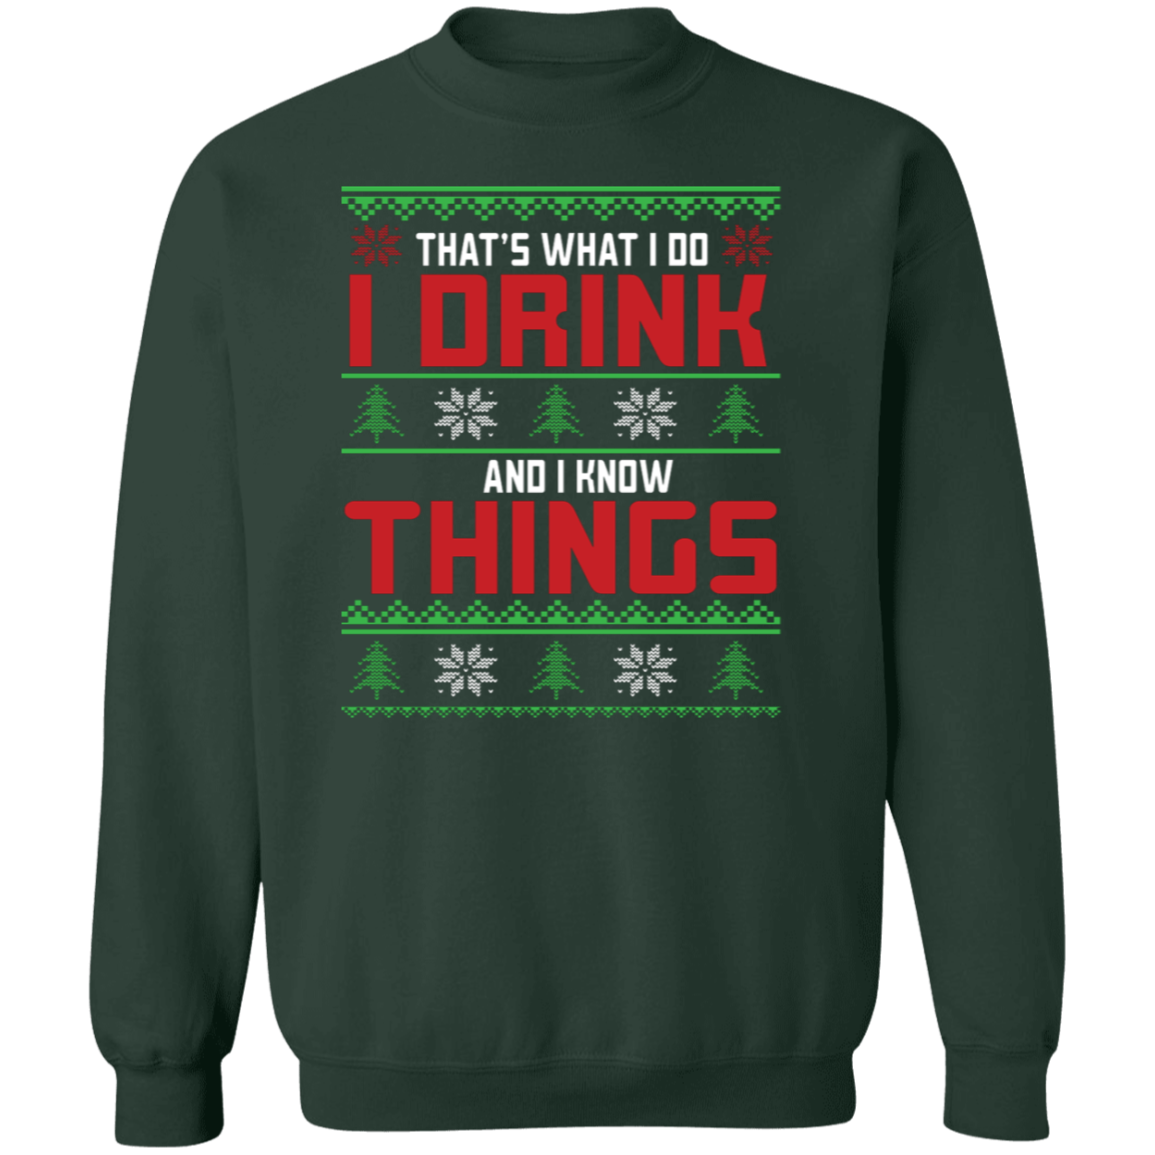 That's What I Do, I Drink And I Know Things - Unisex Ugly Sweater, Christmas, Winter, Fall